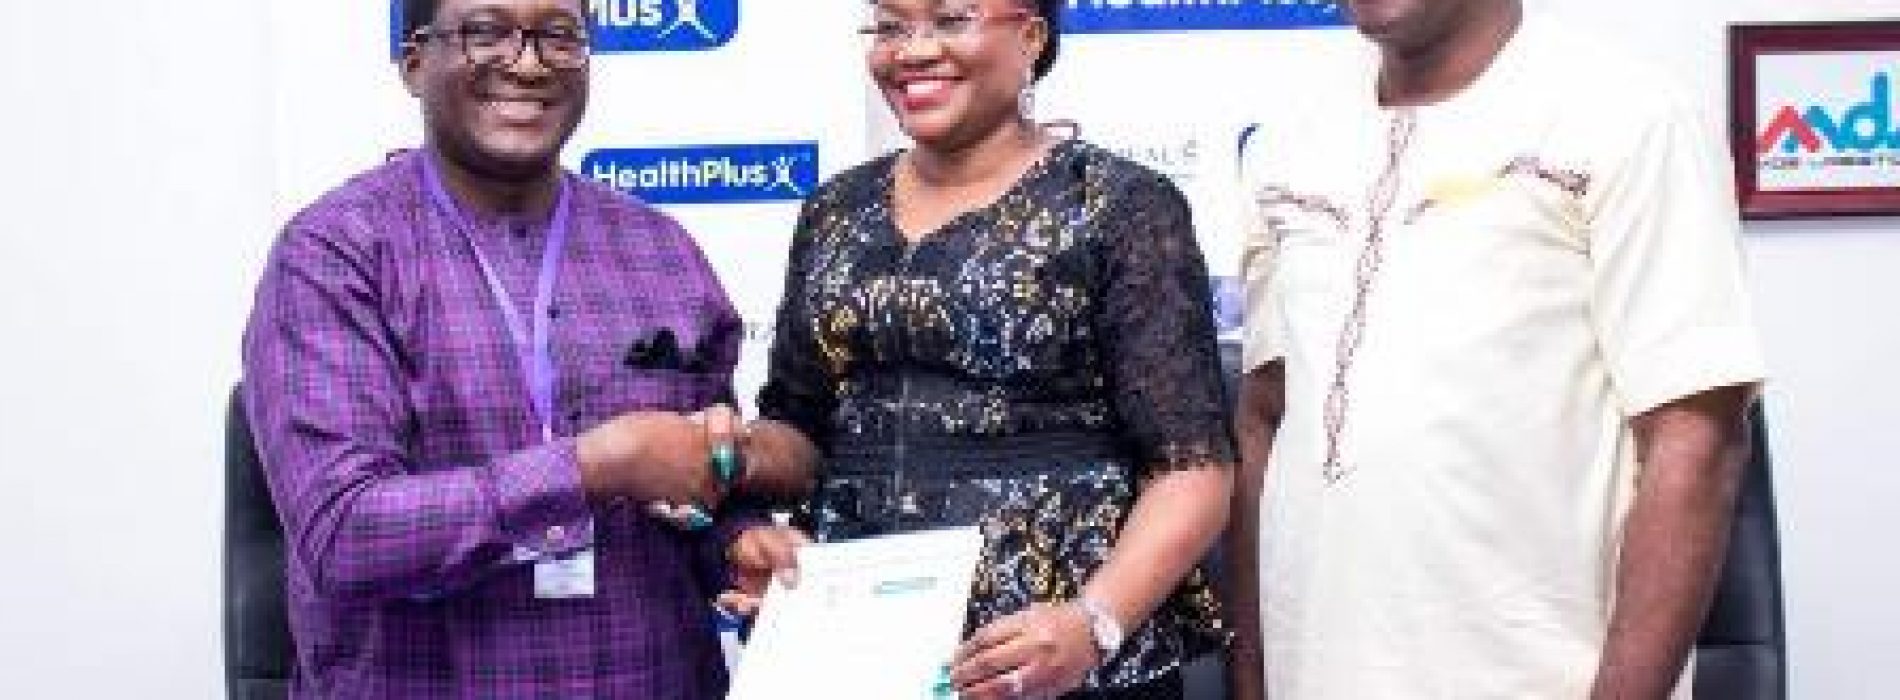 St. Racheal’s Pharma, HealthPlus sign agreement to promote life expectancy in Nigeria